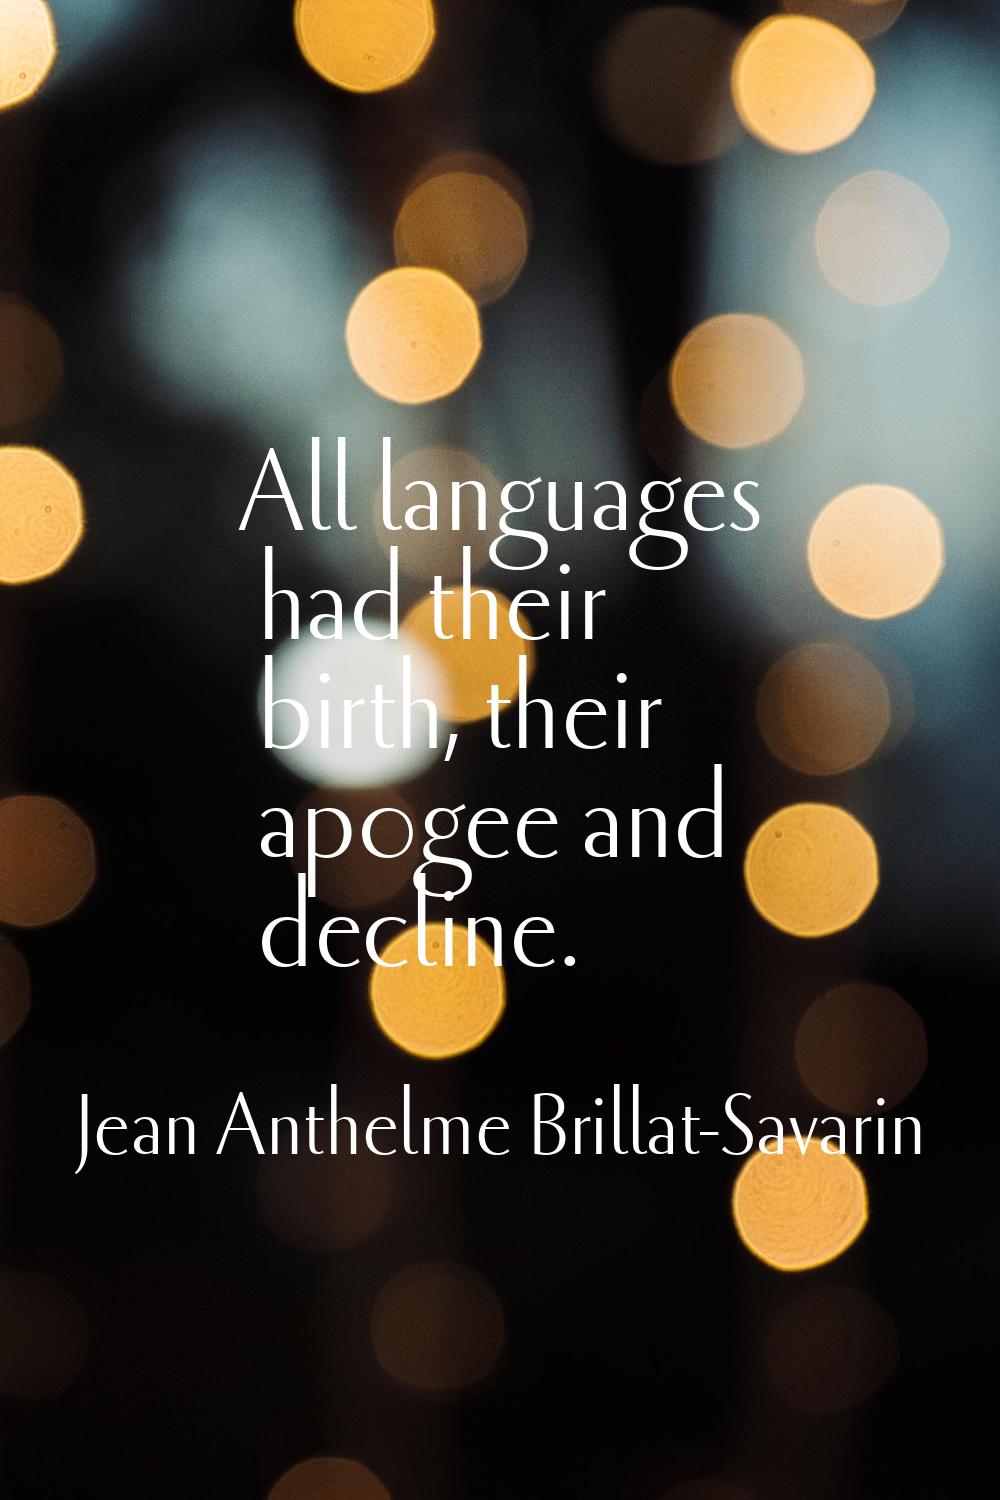 All languages had their birth, their apogee and decline.